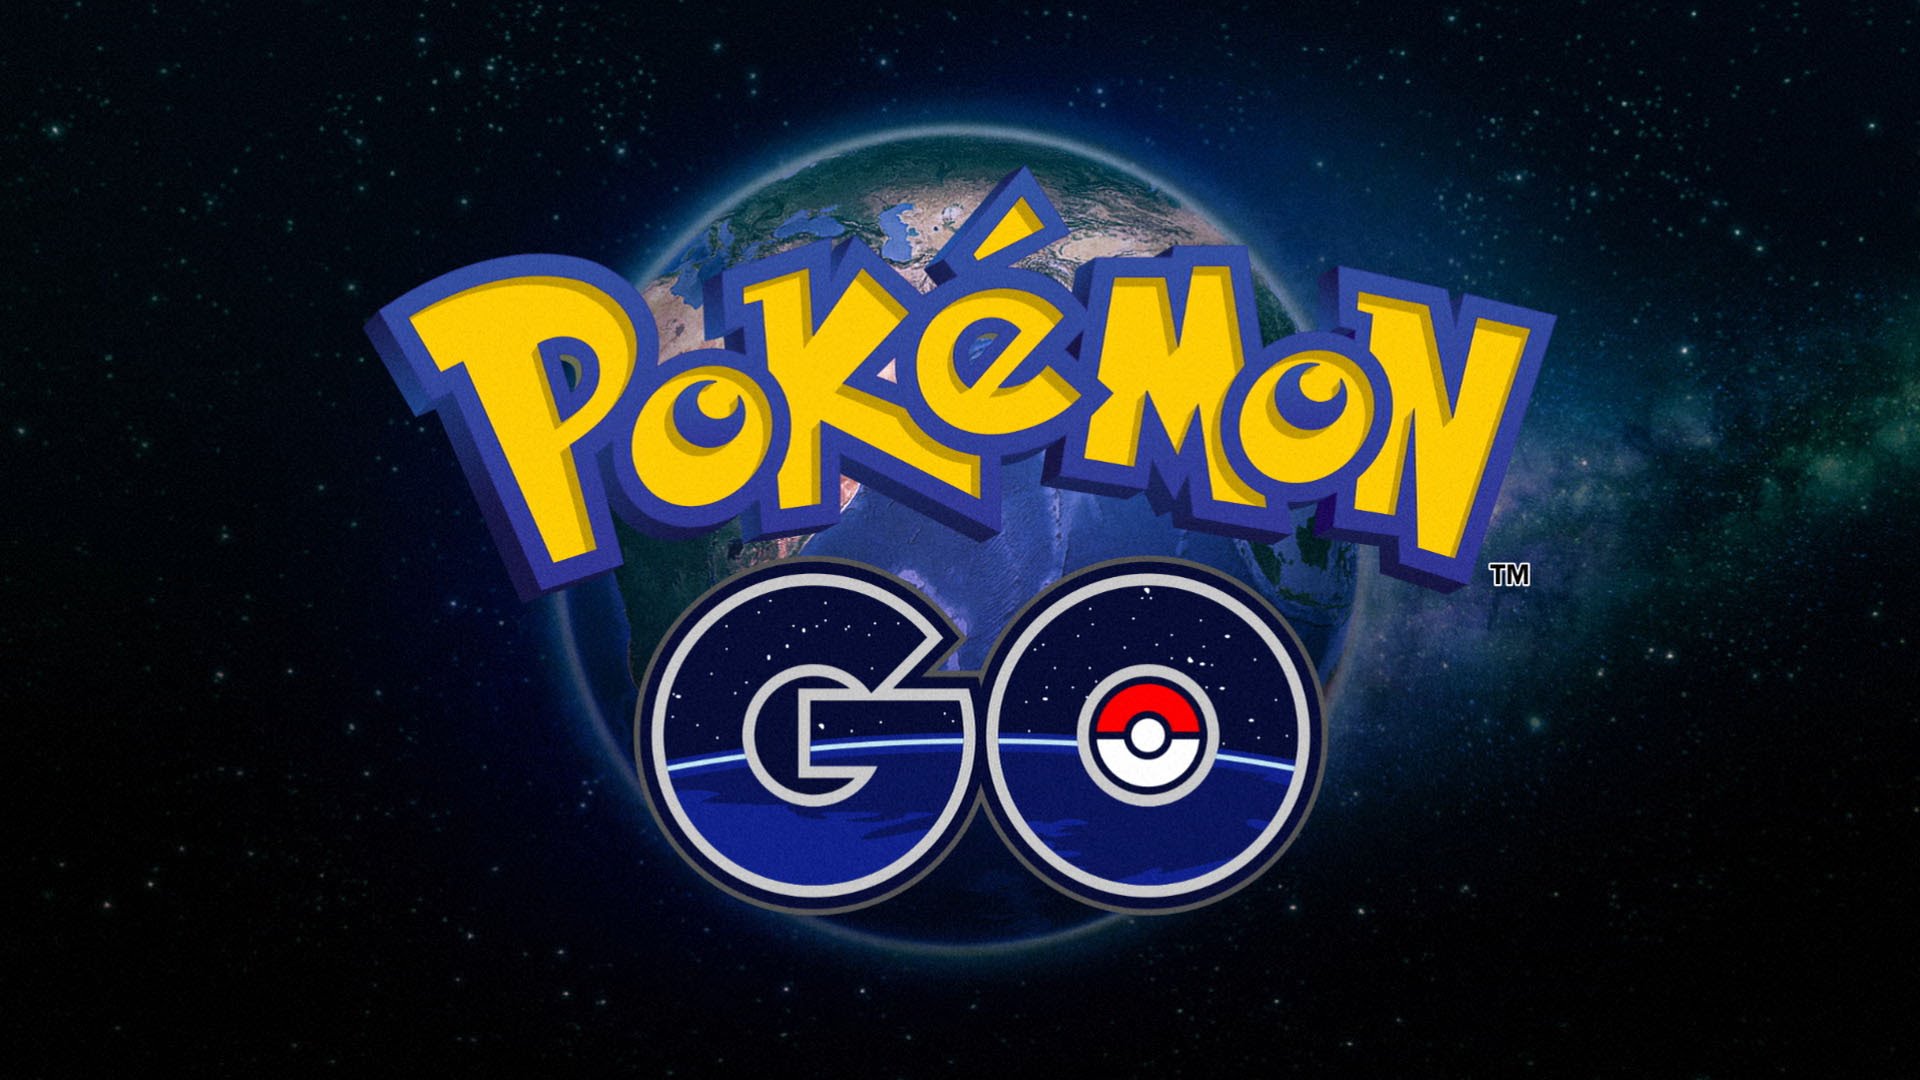 Pokémon GO: Safe to Download or Not?